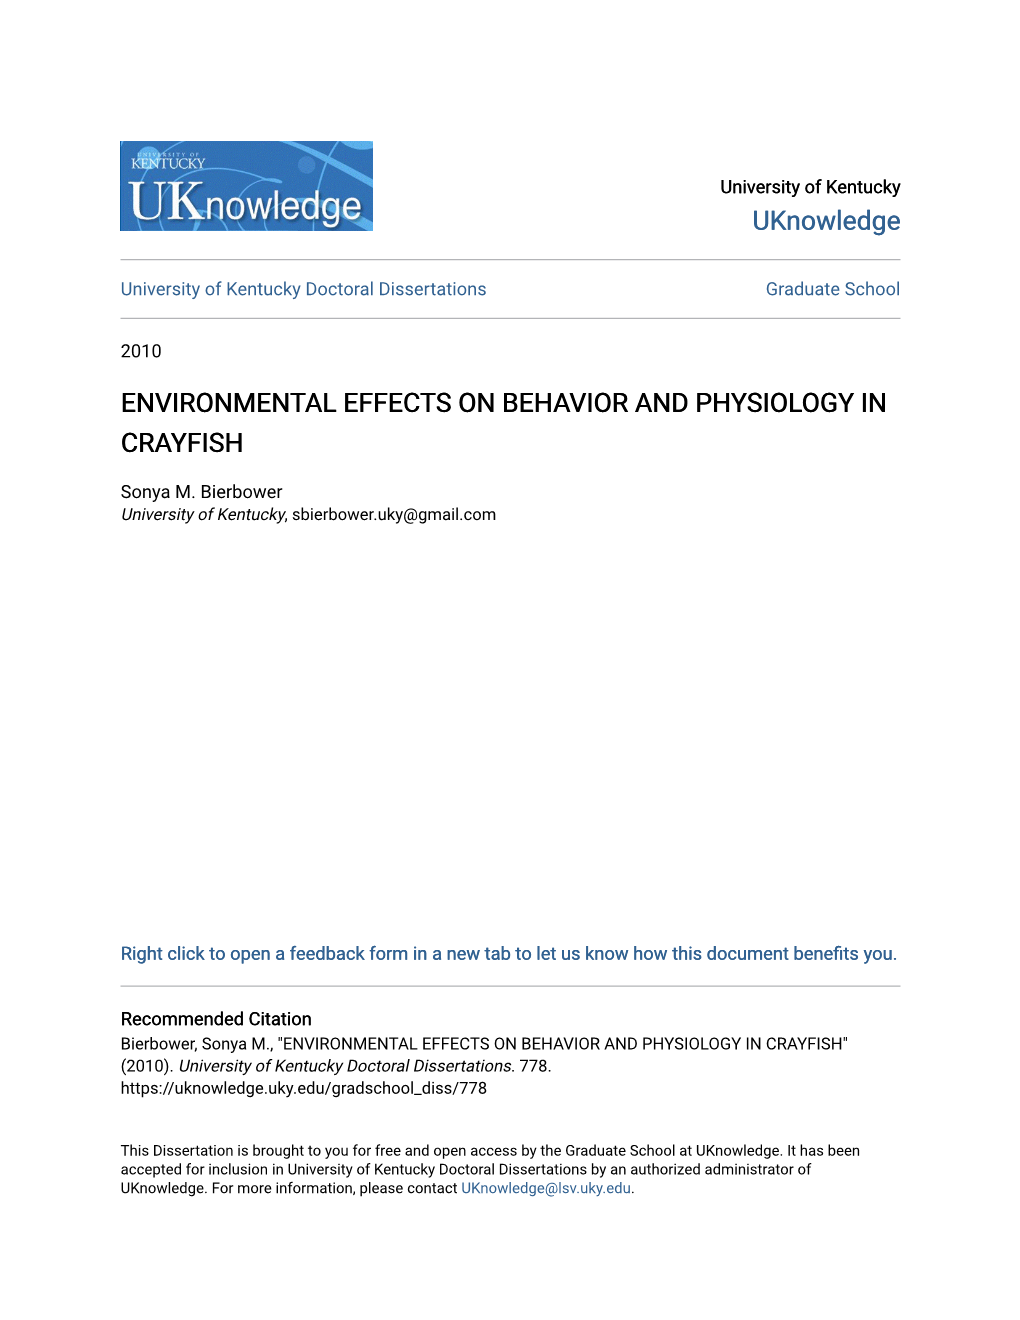 Environmental Effects on Behavior and Physiology in Crayfish